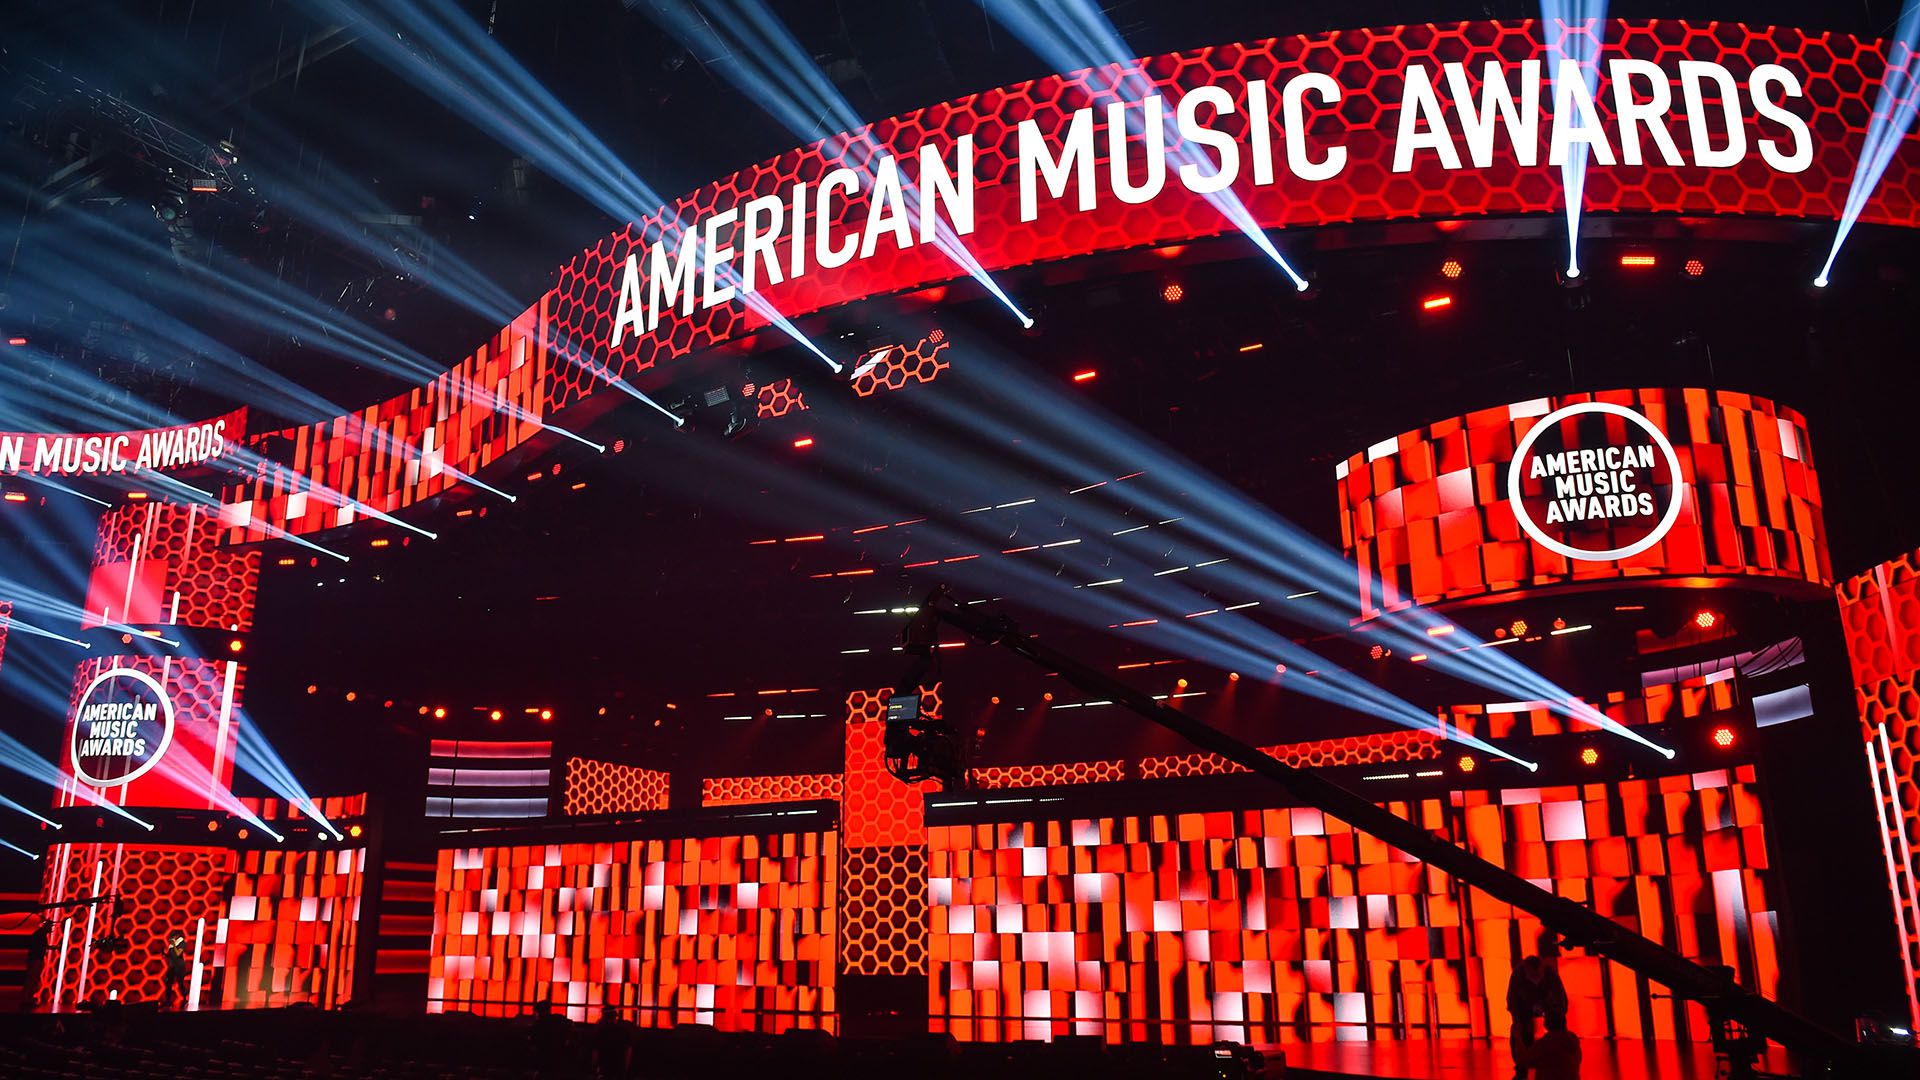 The 2020 American Music Awards